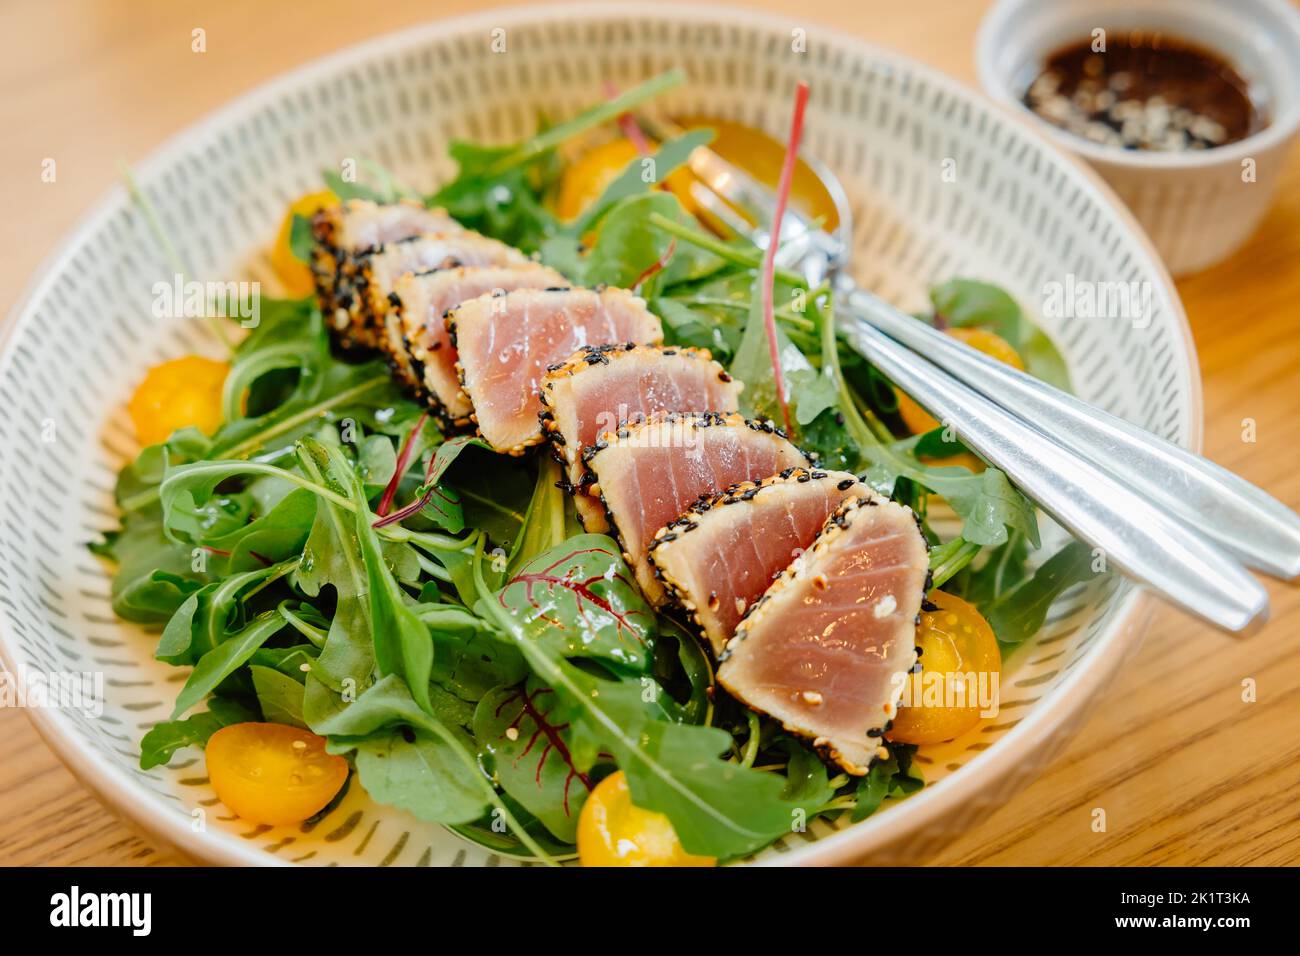 Tuna salad sesame dressing eating menu, clean food healthy good meal protein and vegetable. Stock Photo